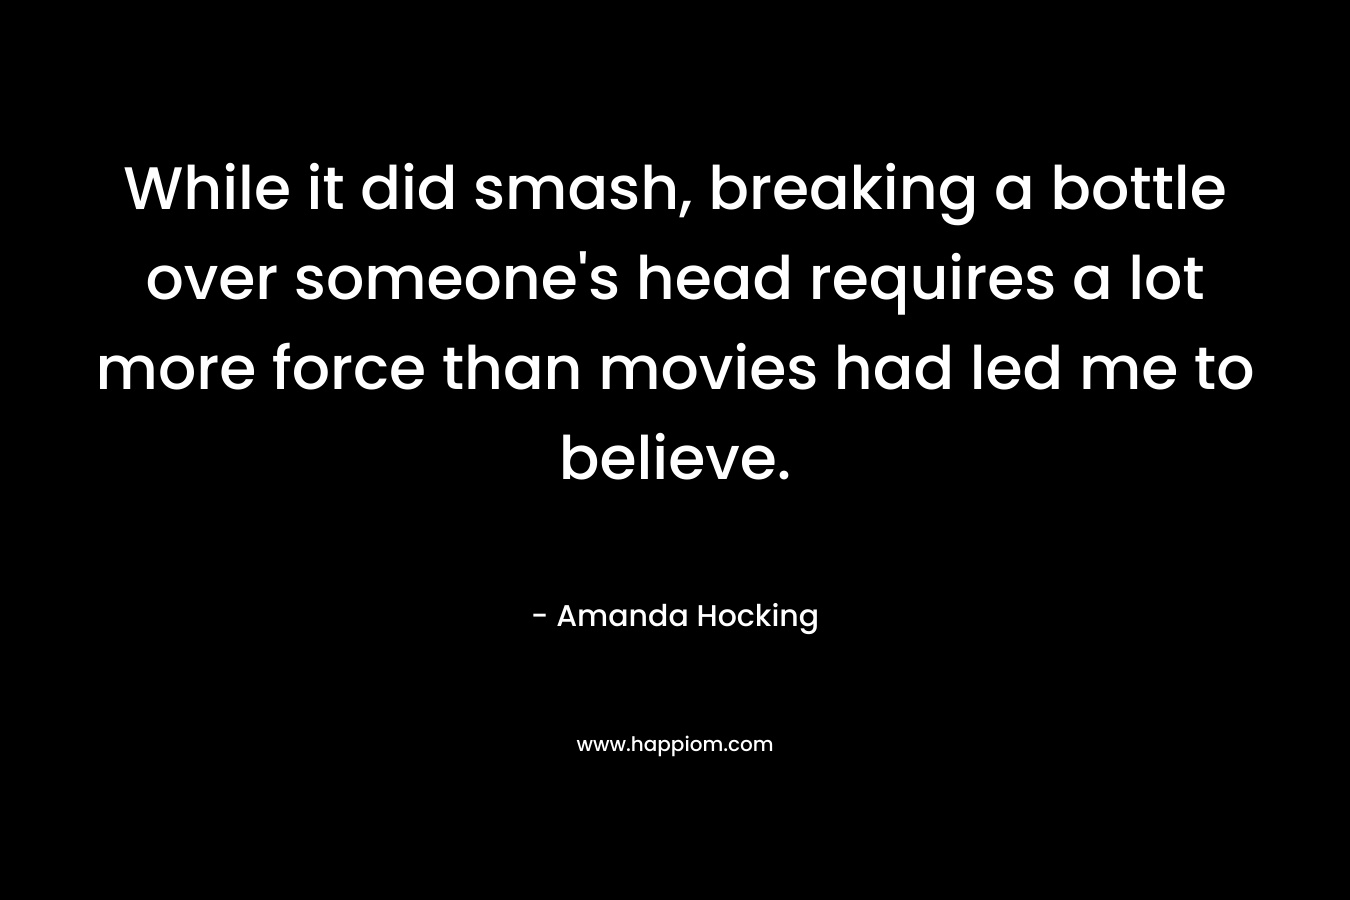 While it did smash, breaking a bottle over someone’s head requires a lot more force than movies had led me to believe. – Amanda Hocking